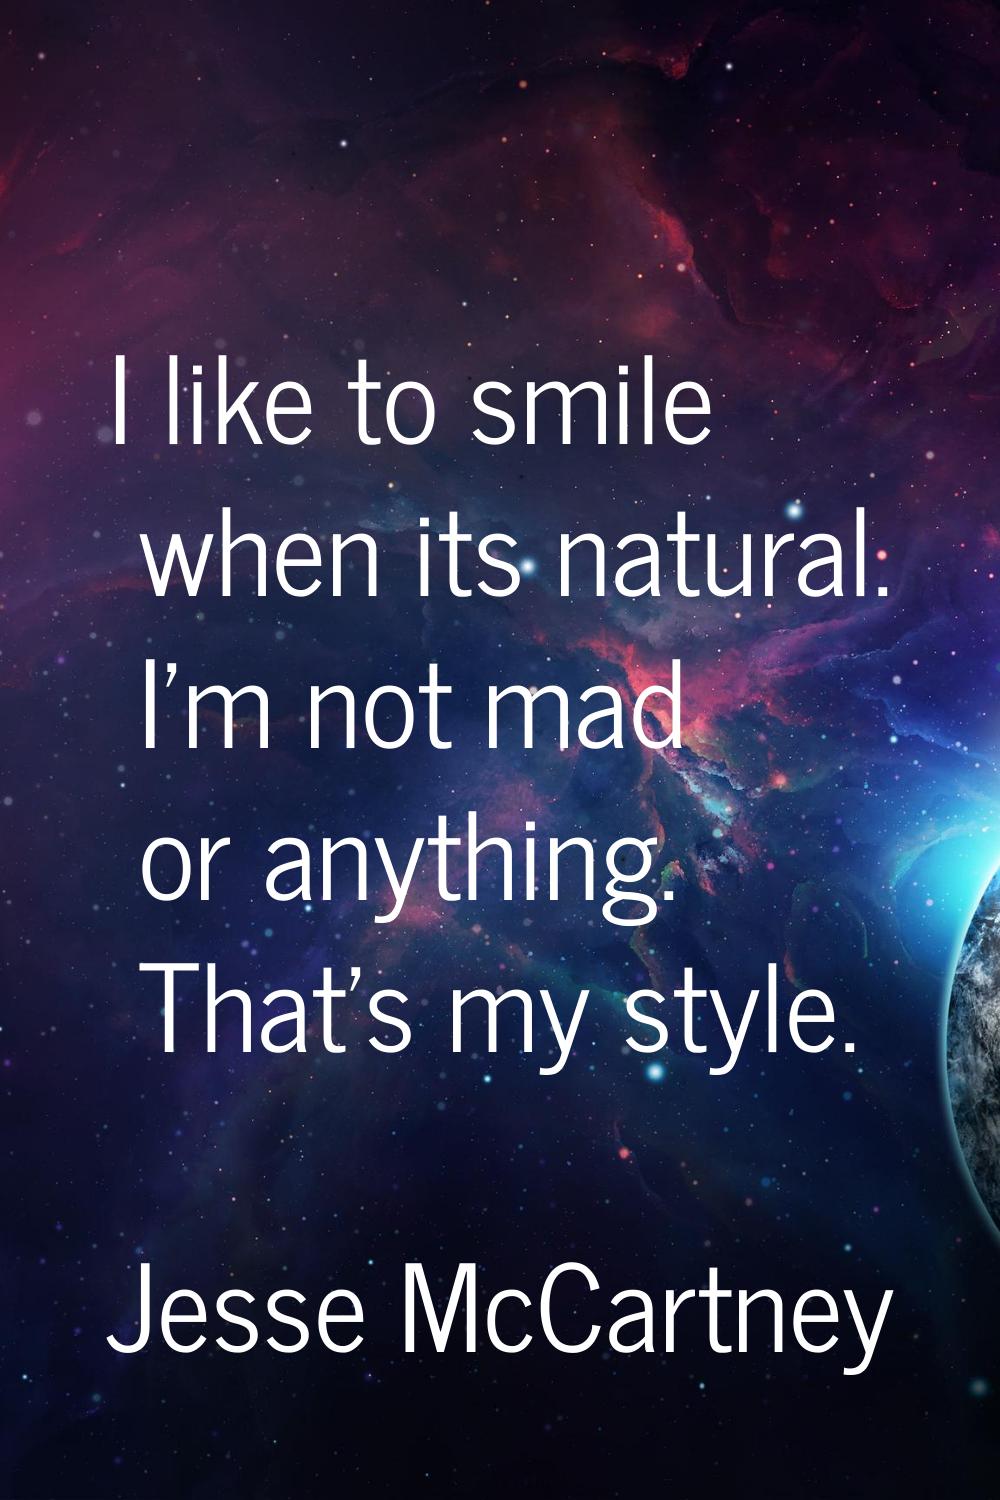 I like to smile when its natural. I'm not mad or anything. That's my style.